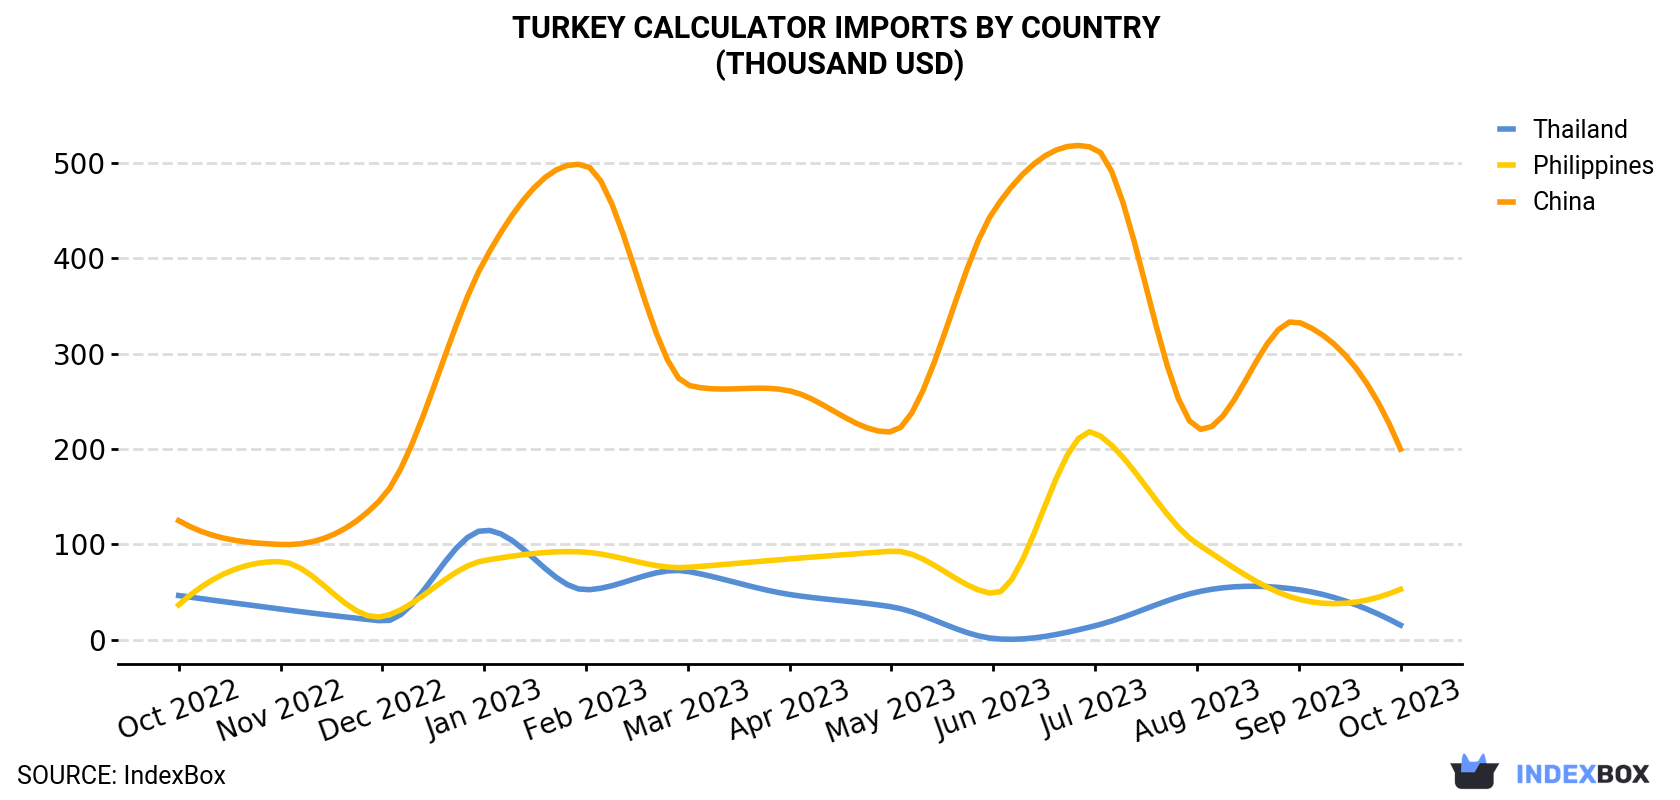 Turkey Calculator Imports By Country (Thousand USD)